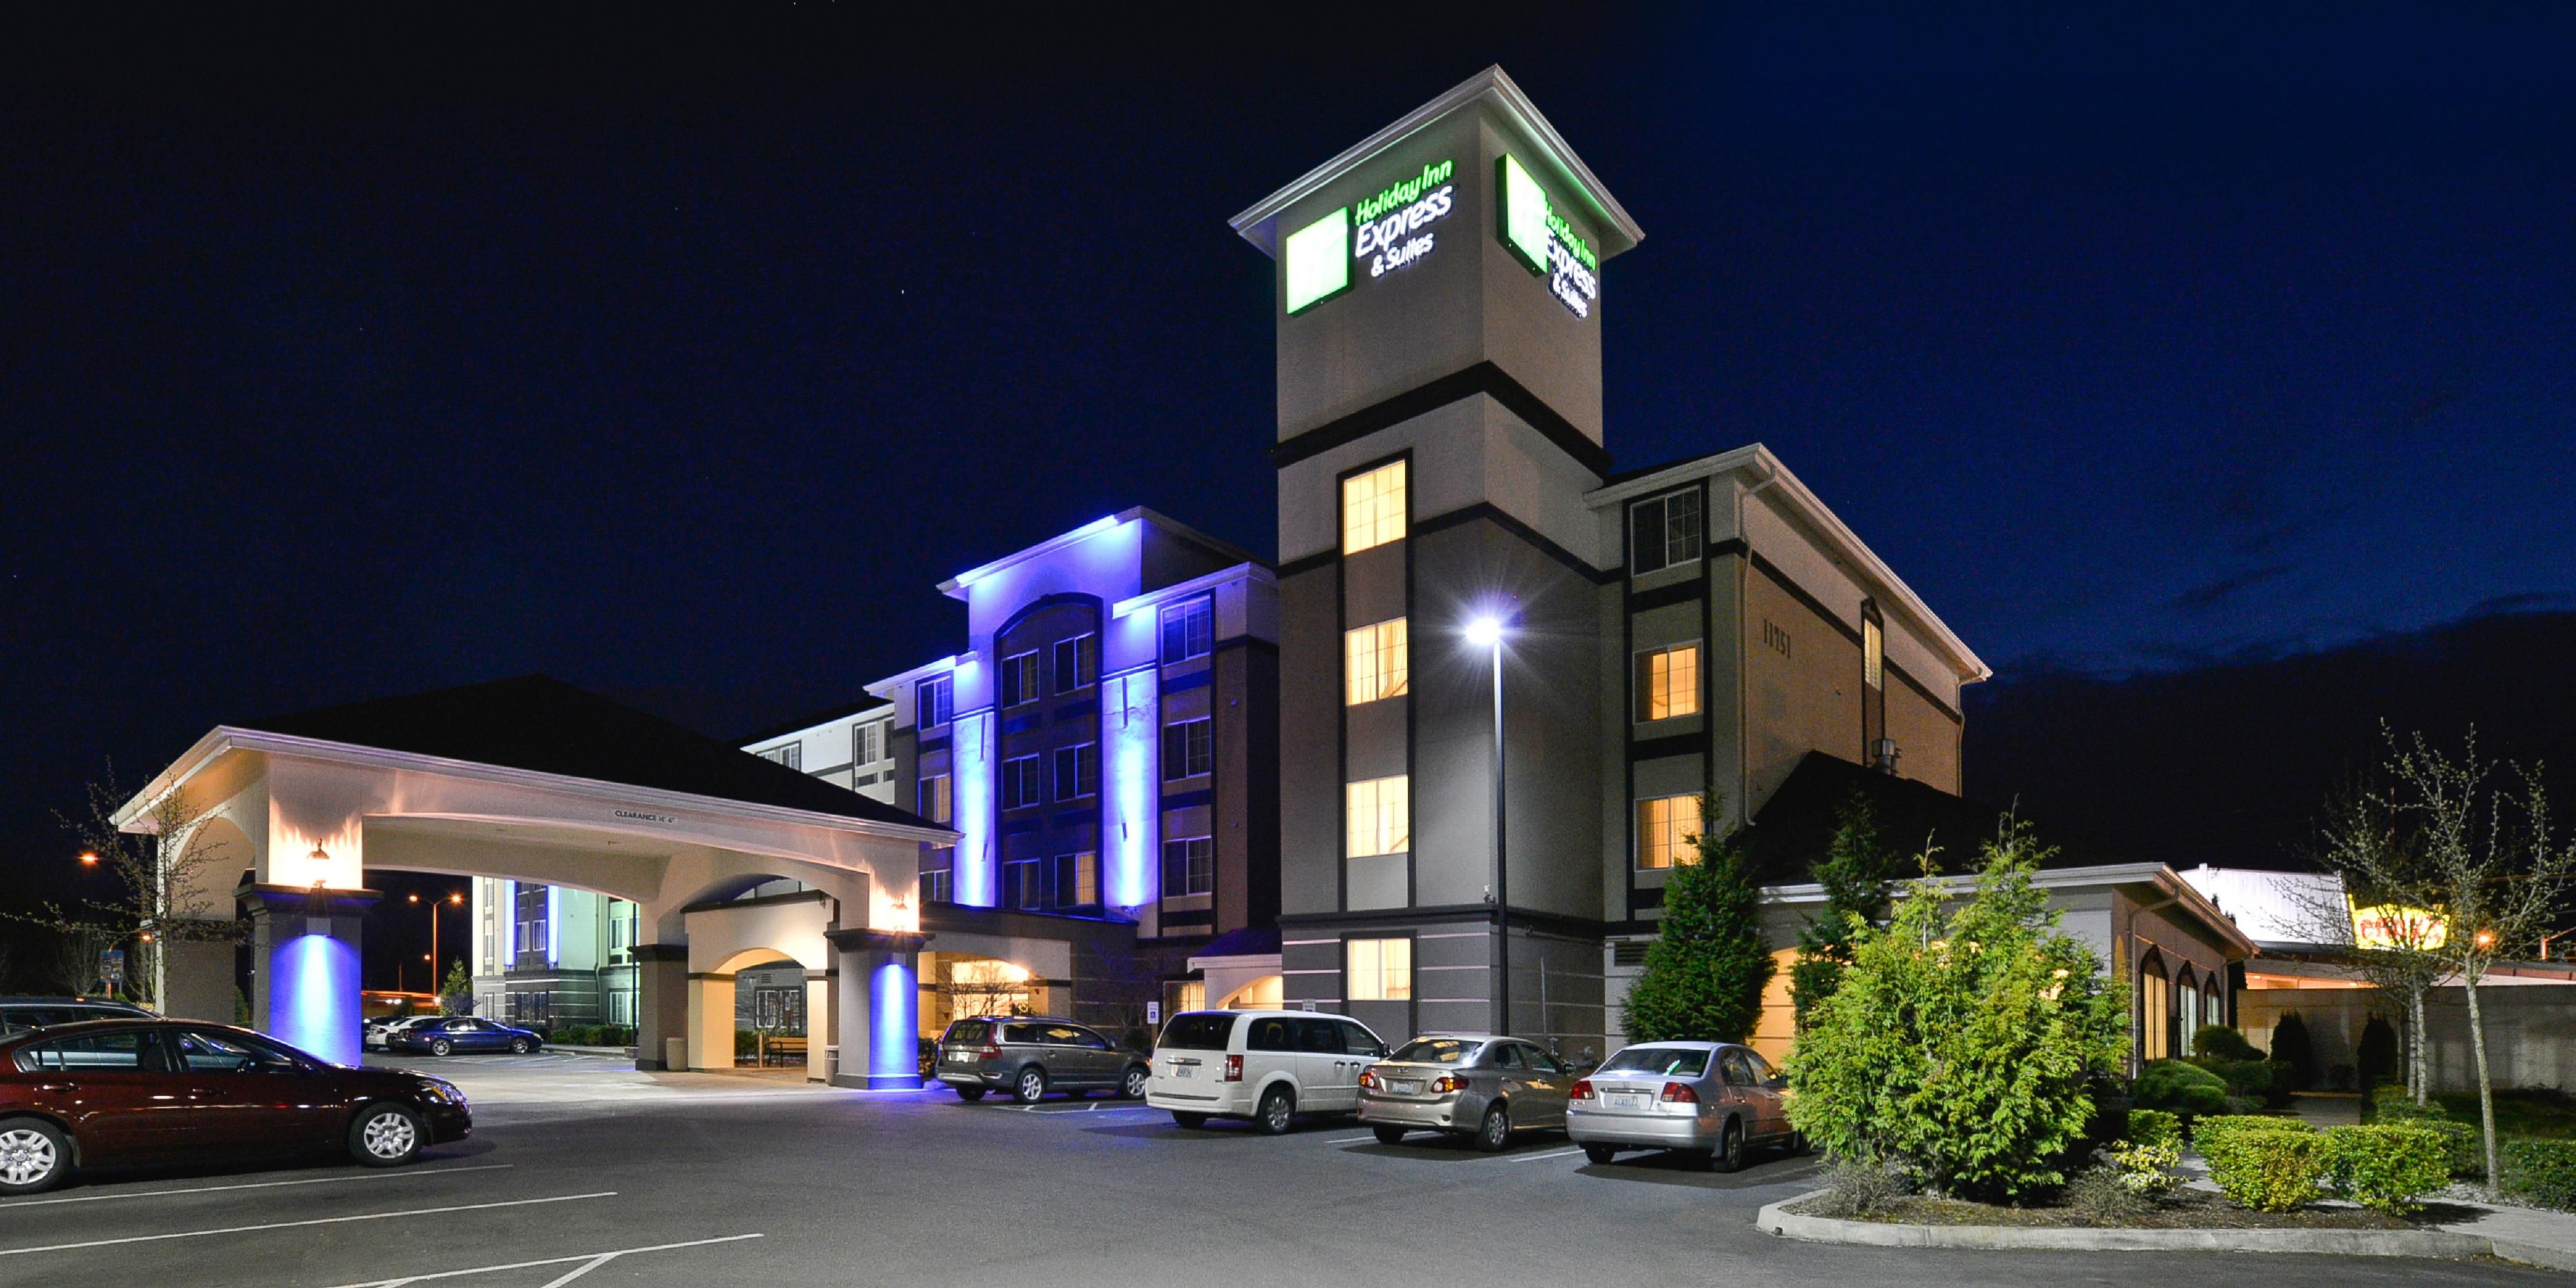 We are conveniently located right off I-5 Exit 125. Minutes to the Lakewood Towne Center, Movie Theatre, Hospital, JBLM Military Base.